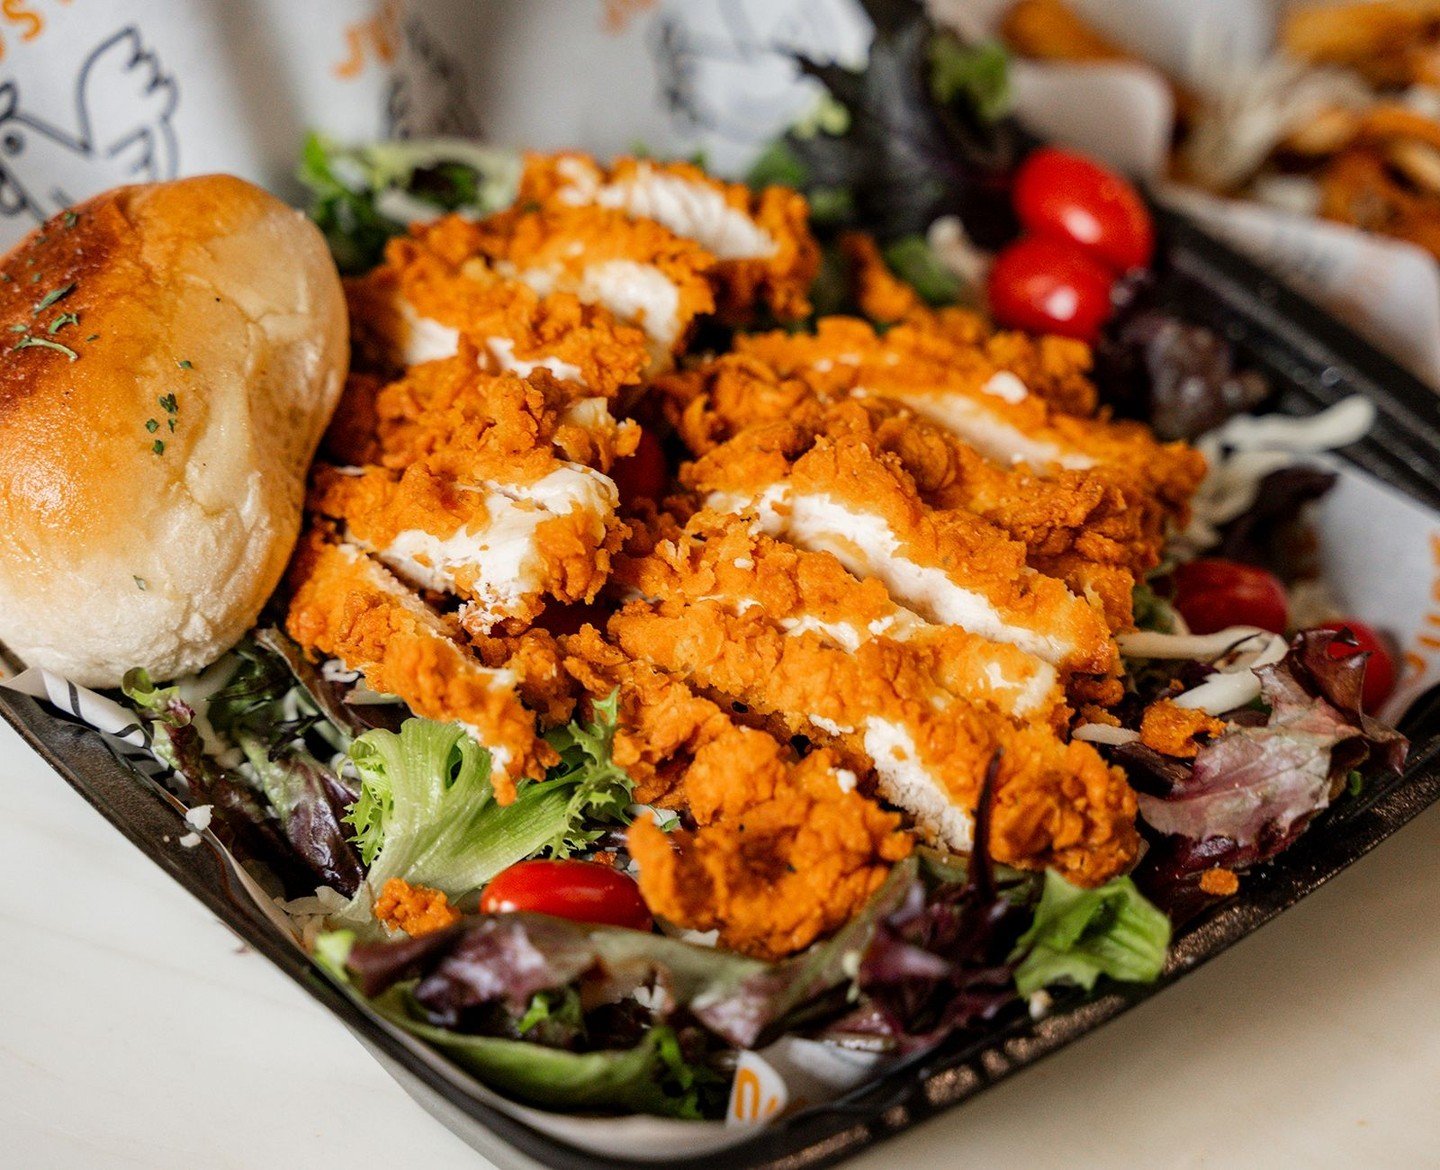 Salads never looked this good. Probably because it's loaded with fresh tenders and topped with a focaccia roll.. It's still a salad though so that means you're eating healthy today.

.

.

.

#JustChicken #TenderLover #chickentenders #tenders #614liv